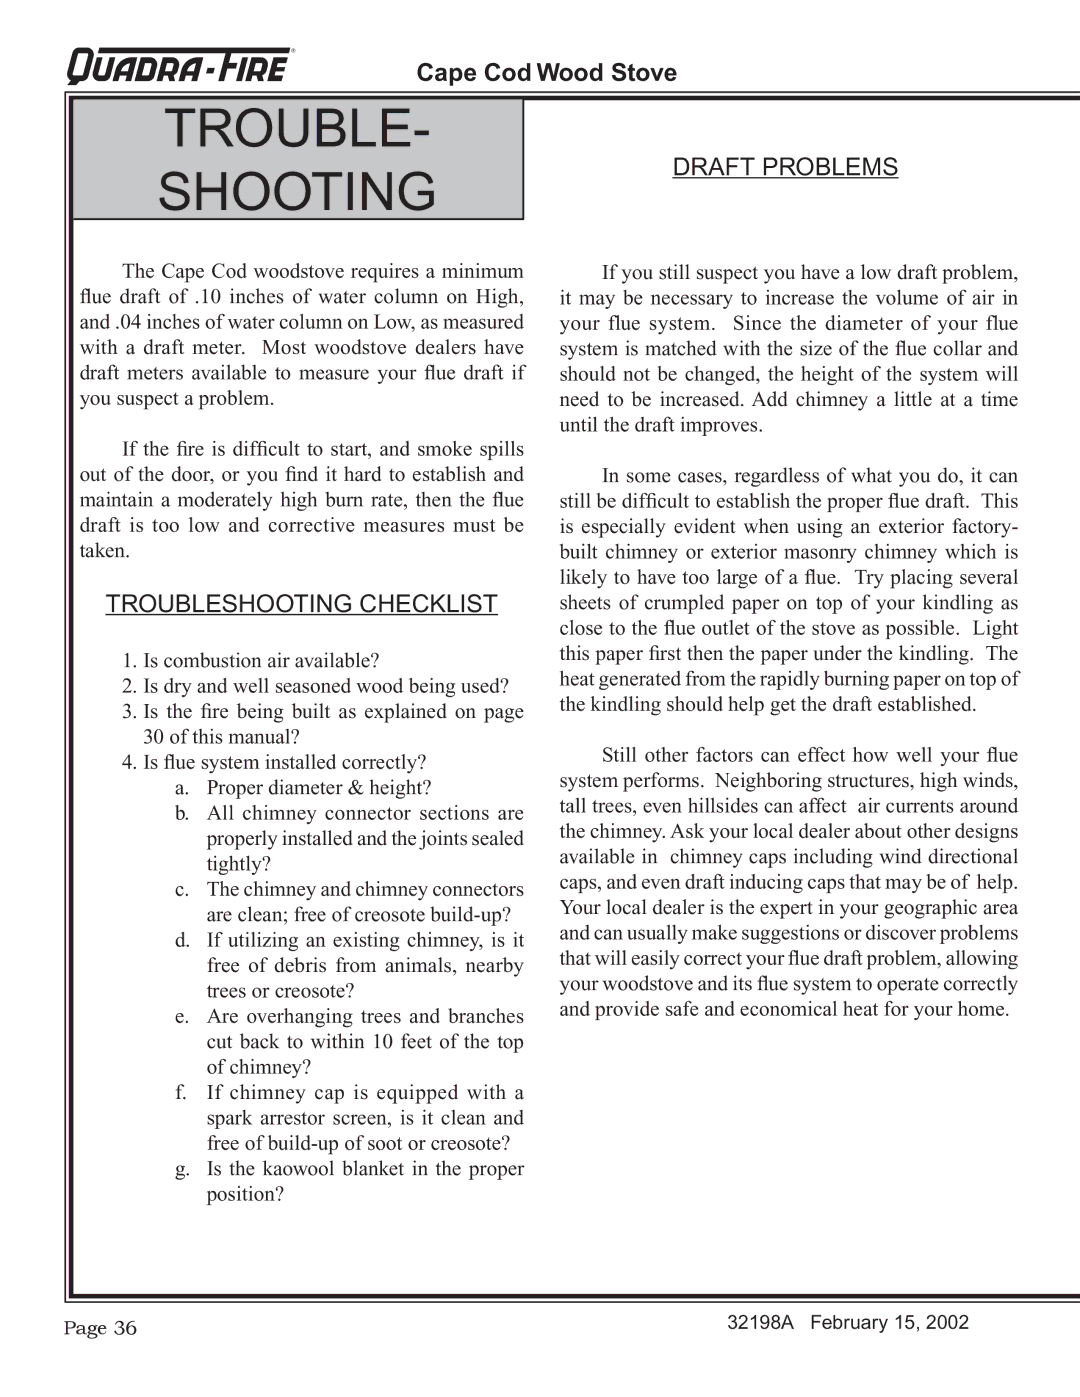 Quadra-Fire 32198A installation instructions TROUBLE- Shooting, Draft Problems, Troubleshooting Checklist 